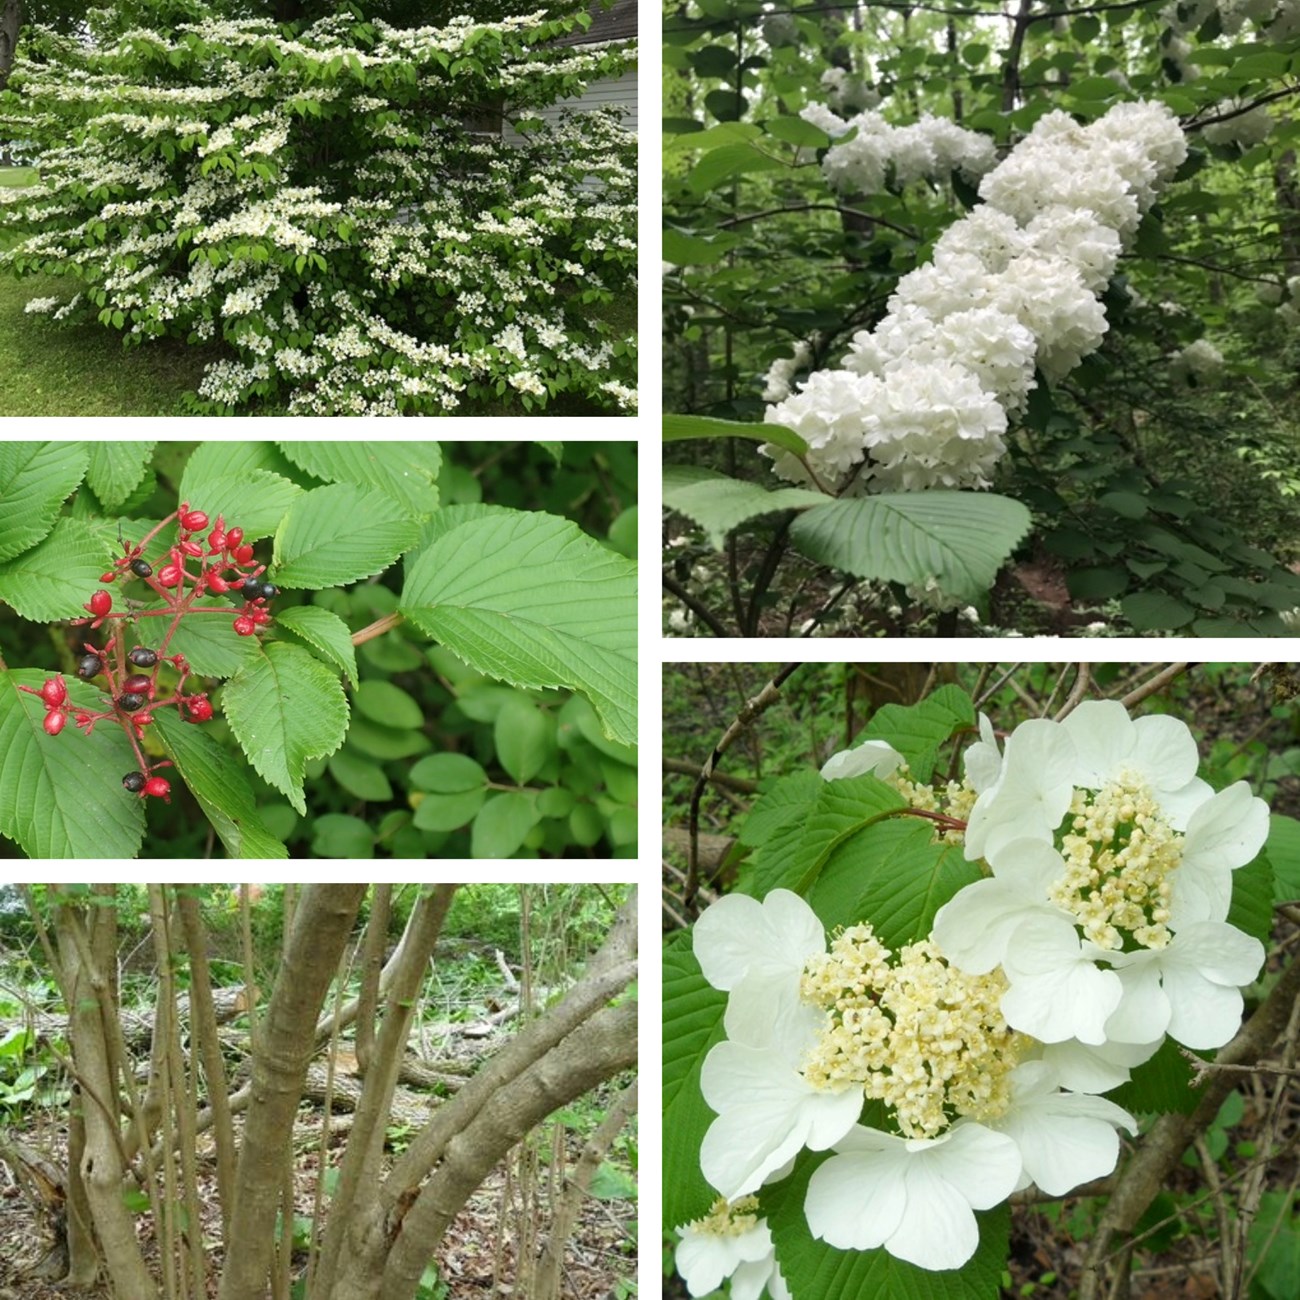 A collage of viburnum plicatum photos showing showball shaped flower clusters, bark, fruit, and overall plant shape